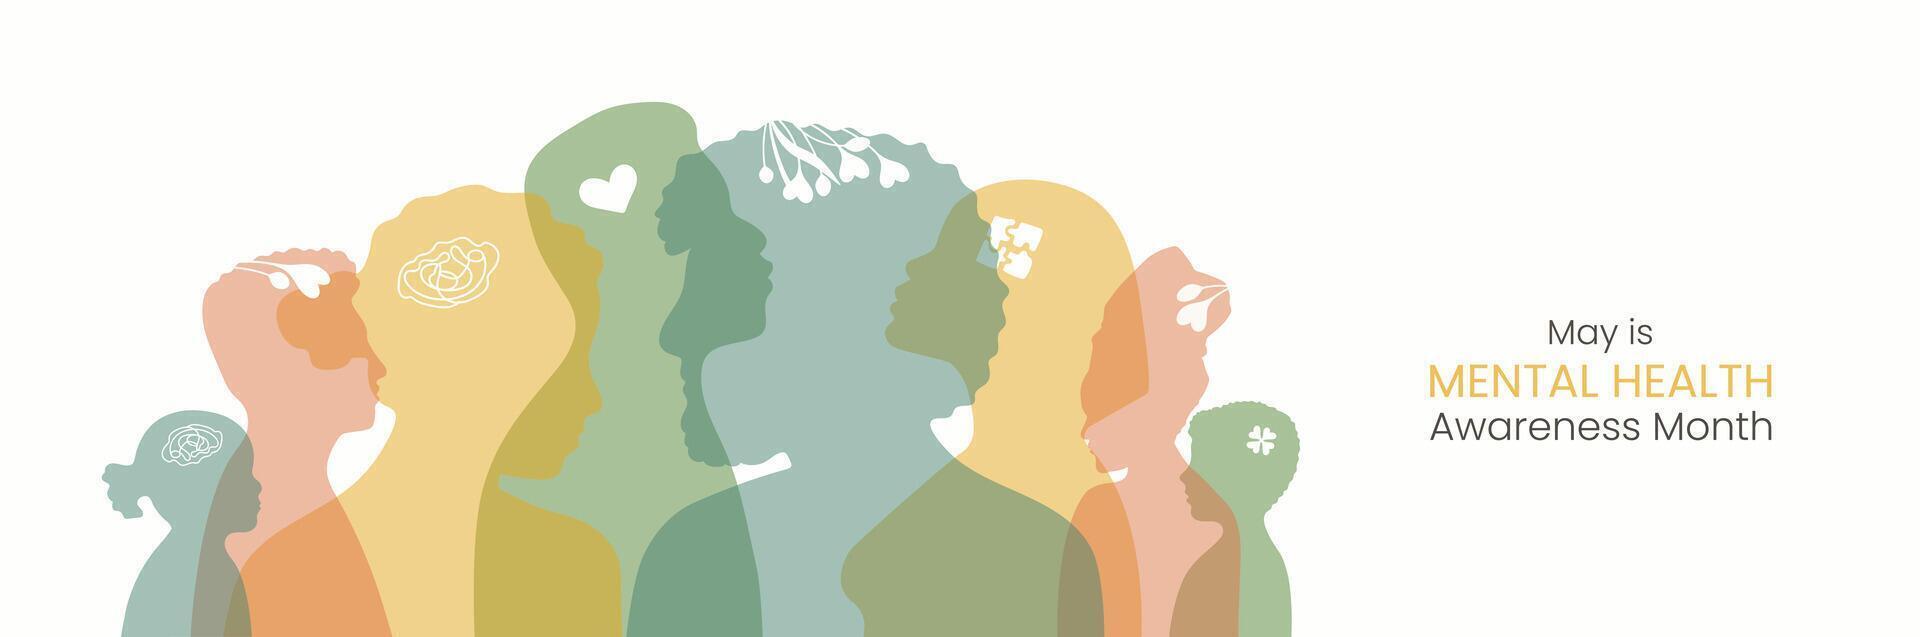 Banner May is Mental Health Awareness month. Horizontal design with Diversity people silhouette in flat style. Reminding about importance of good state of mind. Psychological well-being presentation. vector